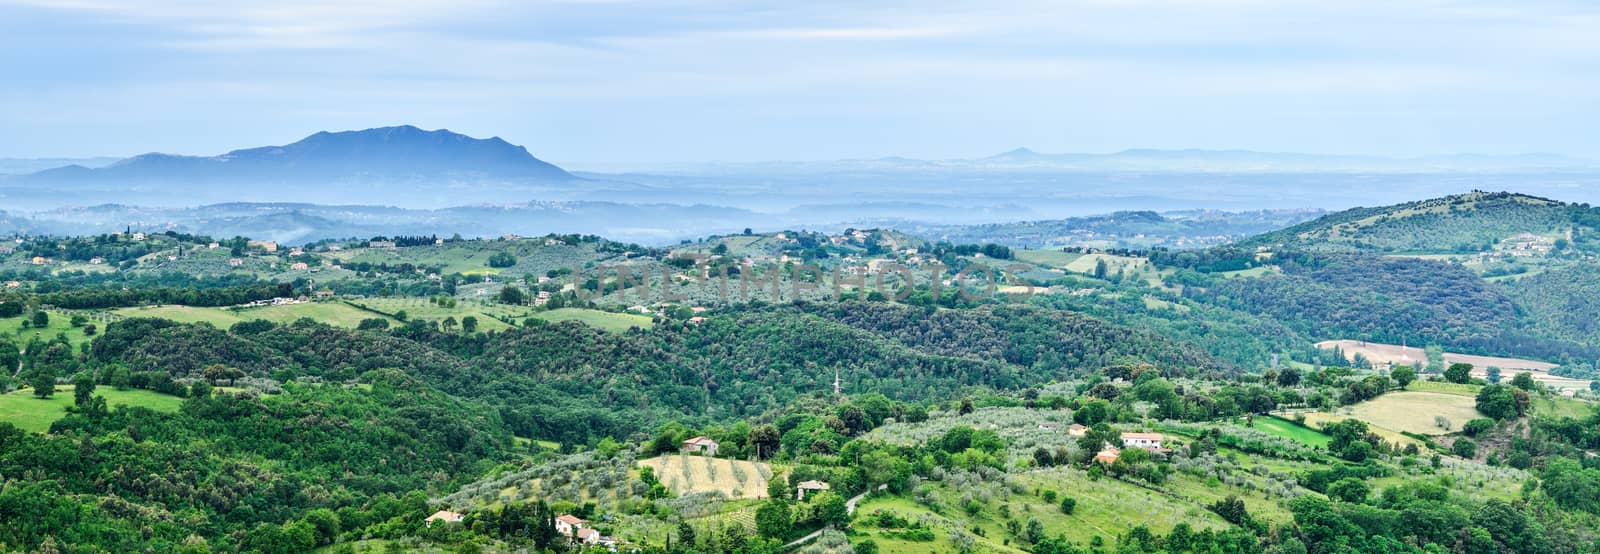 Panoramic view. Italy by styf22